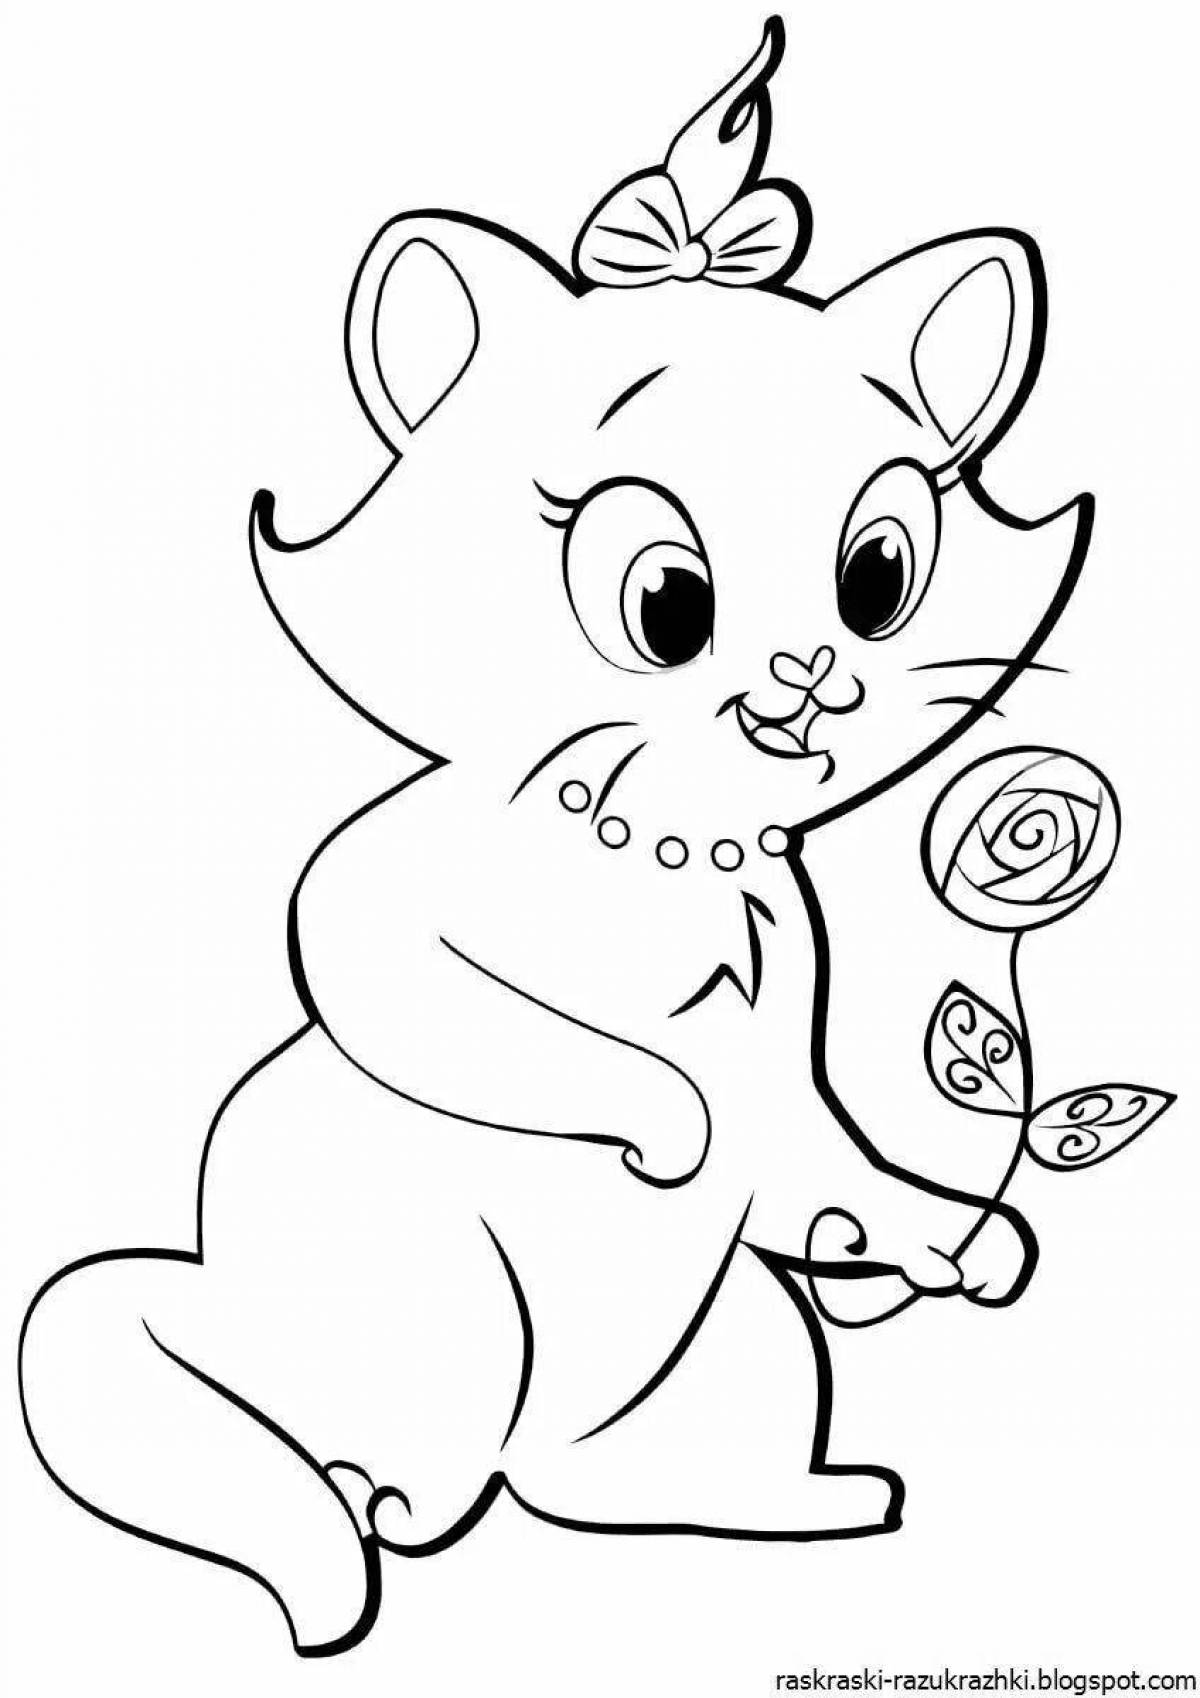 Happy coloring page cat for 4-5 year olds